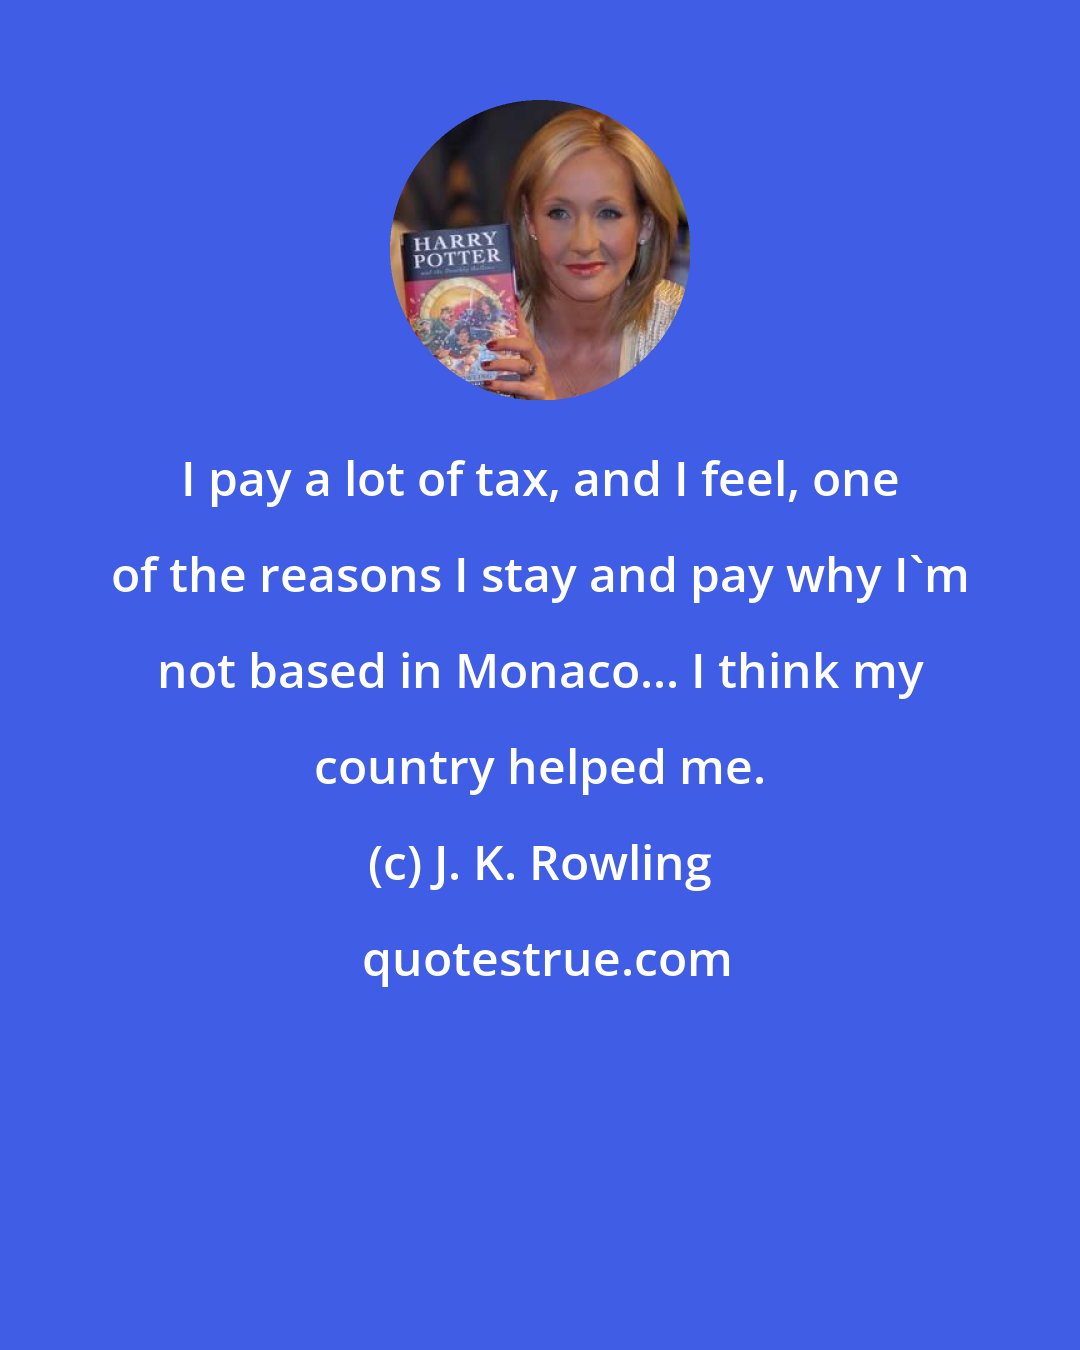 J. K. Rowling: I pay a lot of tax, and I feel, one of the reasons I stay and pay why I'm not based in Monaco... I think my country helped me.